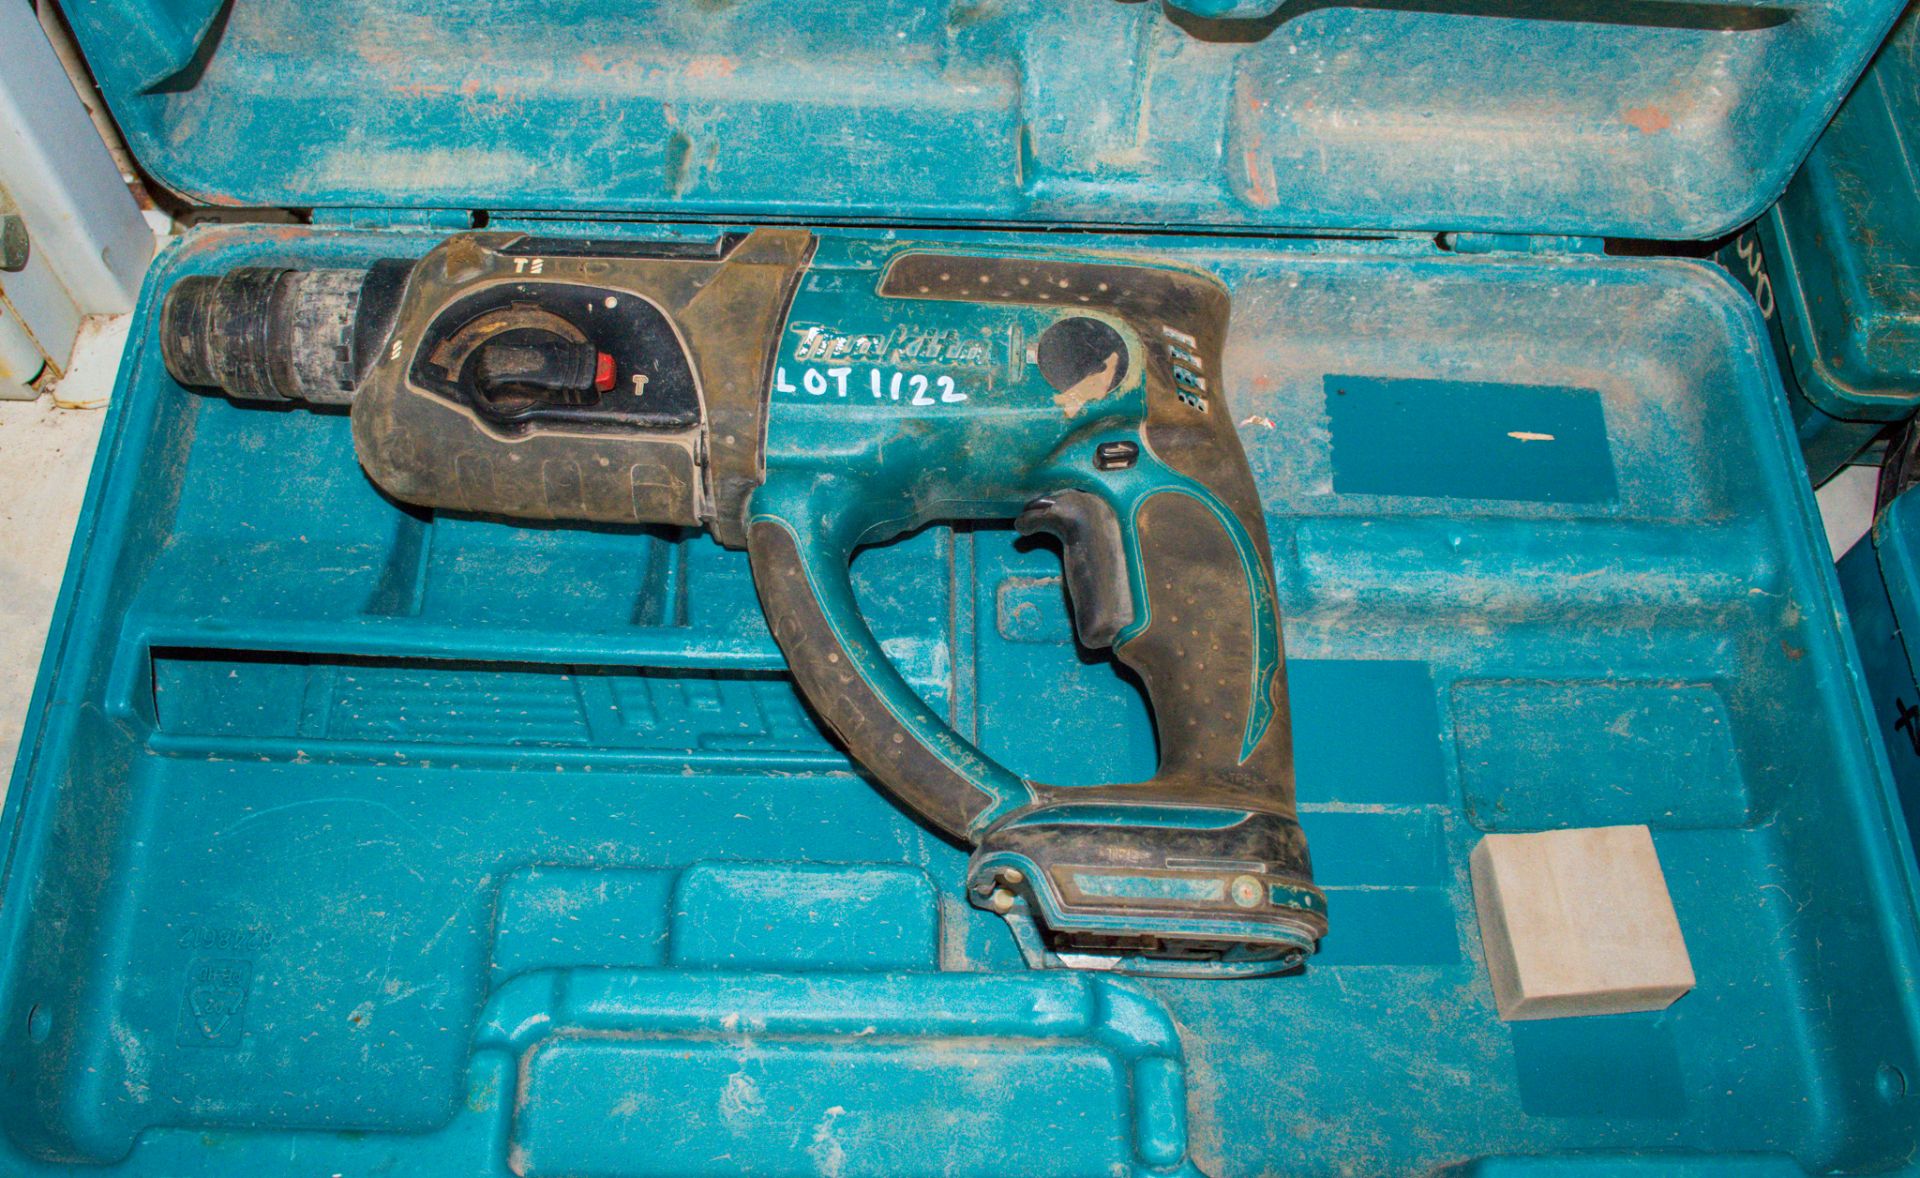 Makita DHR202 18v SDS rotary hammer drill c/w carry case ** No battery or charger ** 03BX0083